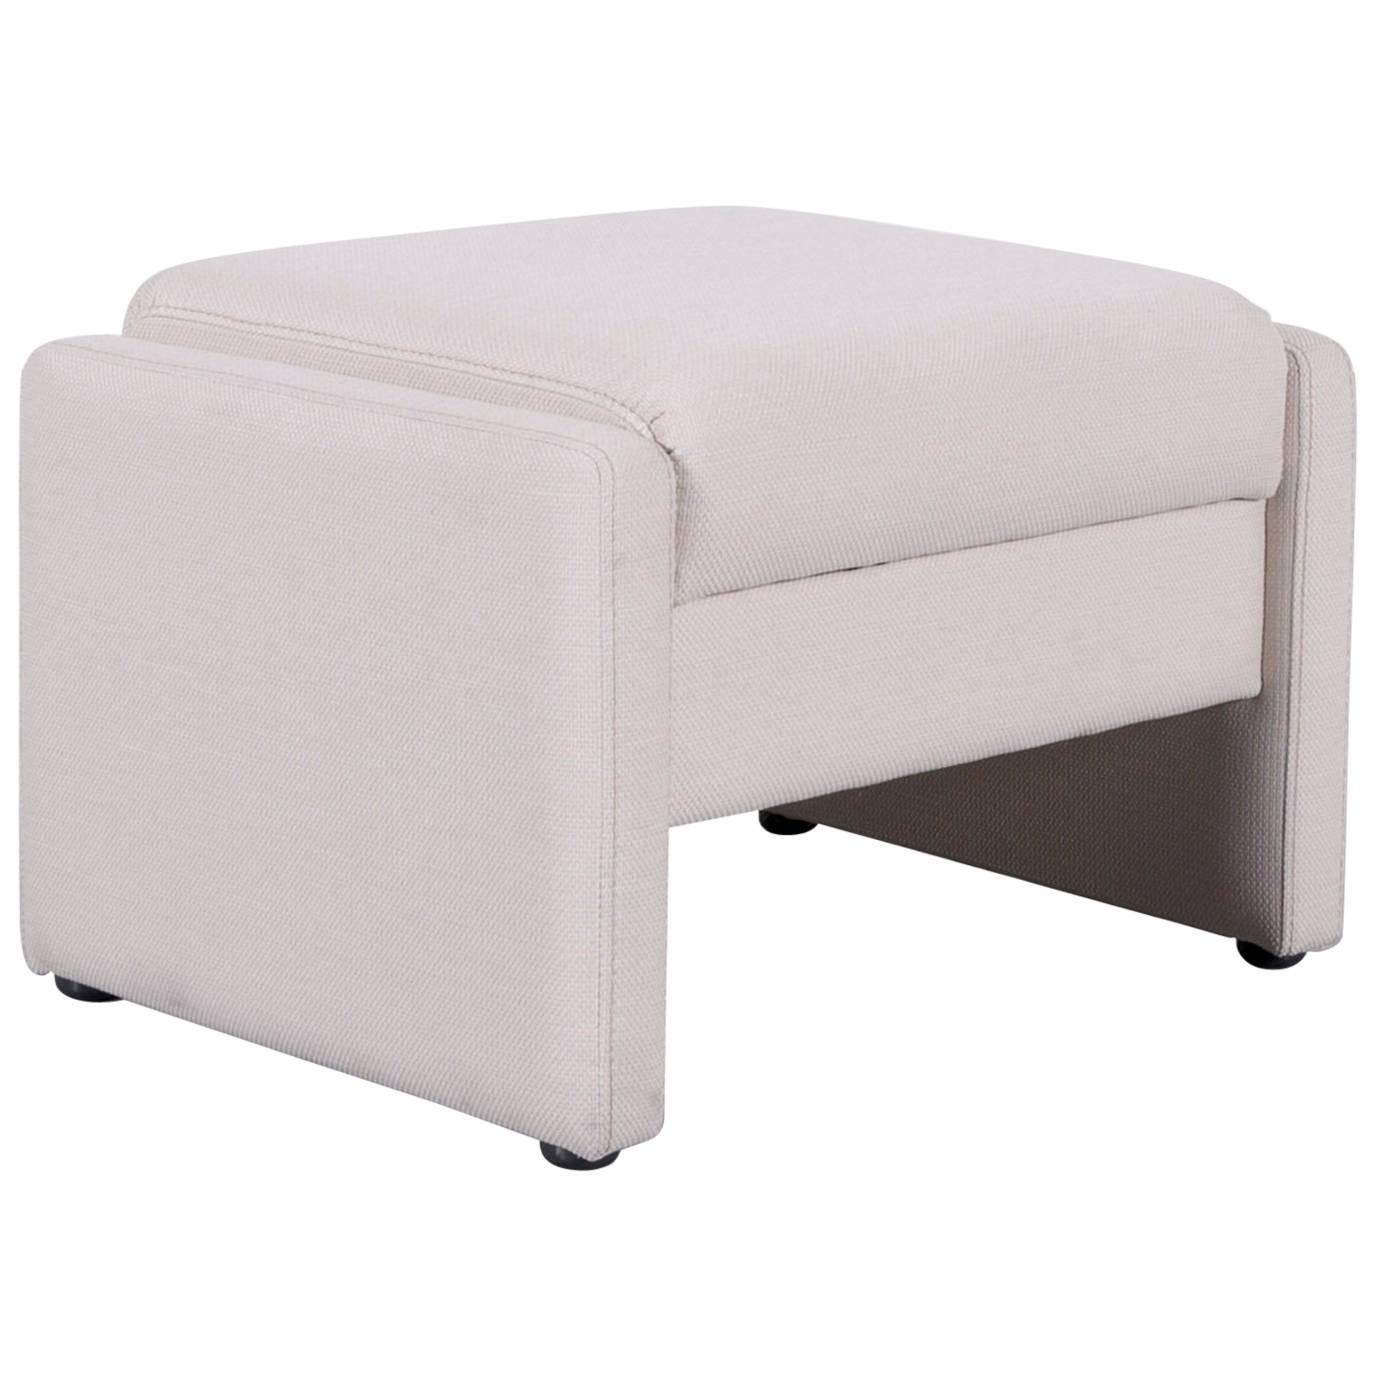 Himolla Fabric Foot-Stool Off-White Bench For Sale